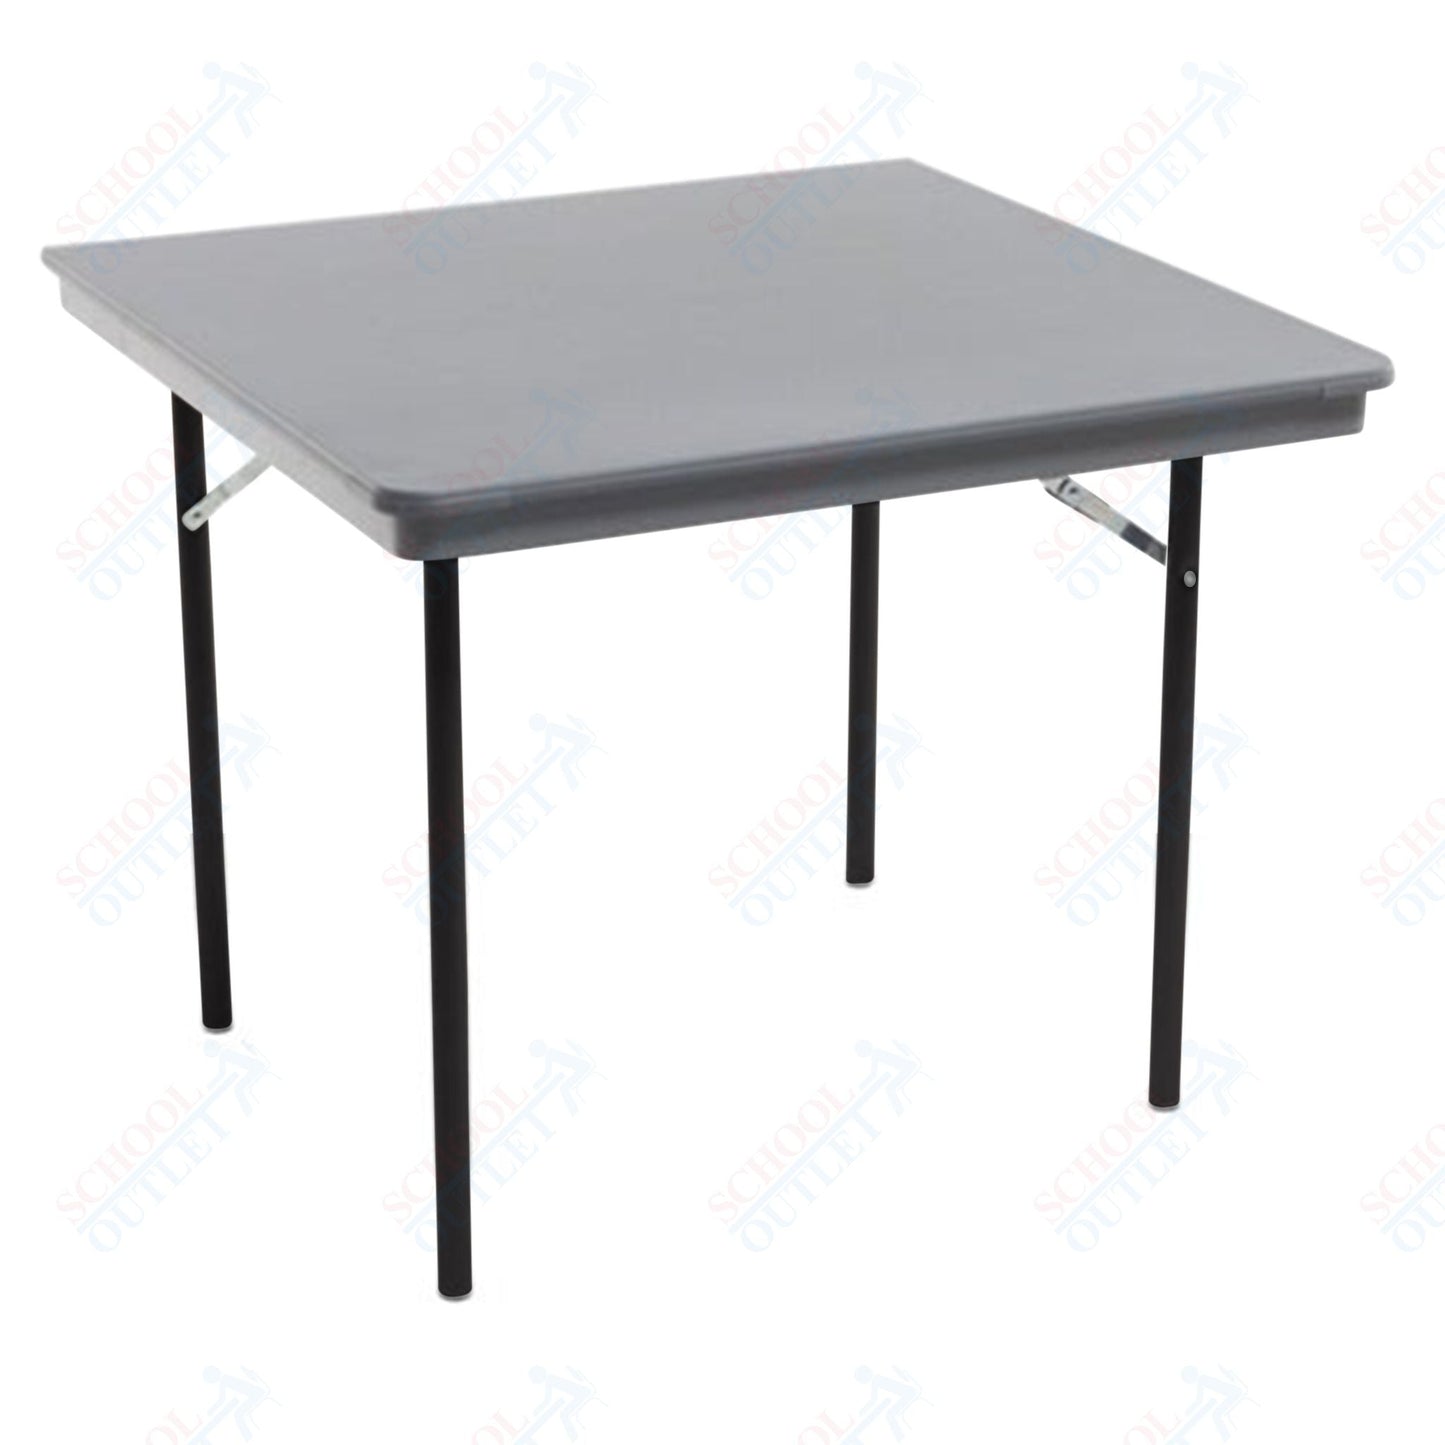 AmTab Dynalite Featherweight Heavy - Duty ABS Plastic Folding Table - Square - 36"W x 36"L x 29"H (AmTab AMT - SQ36DL) - SchoolOutlet